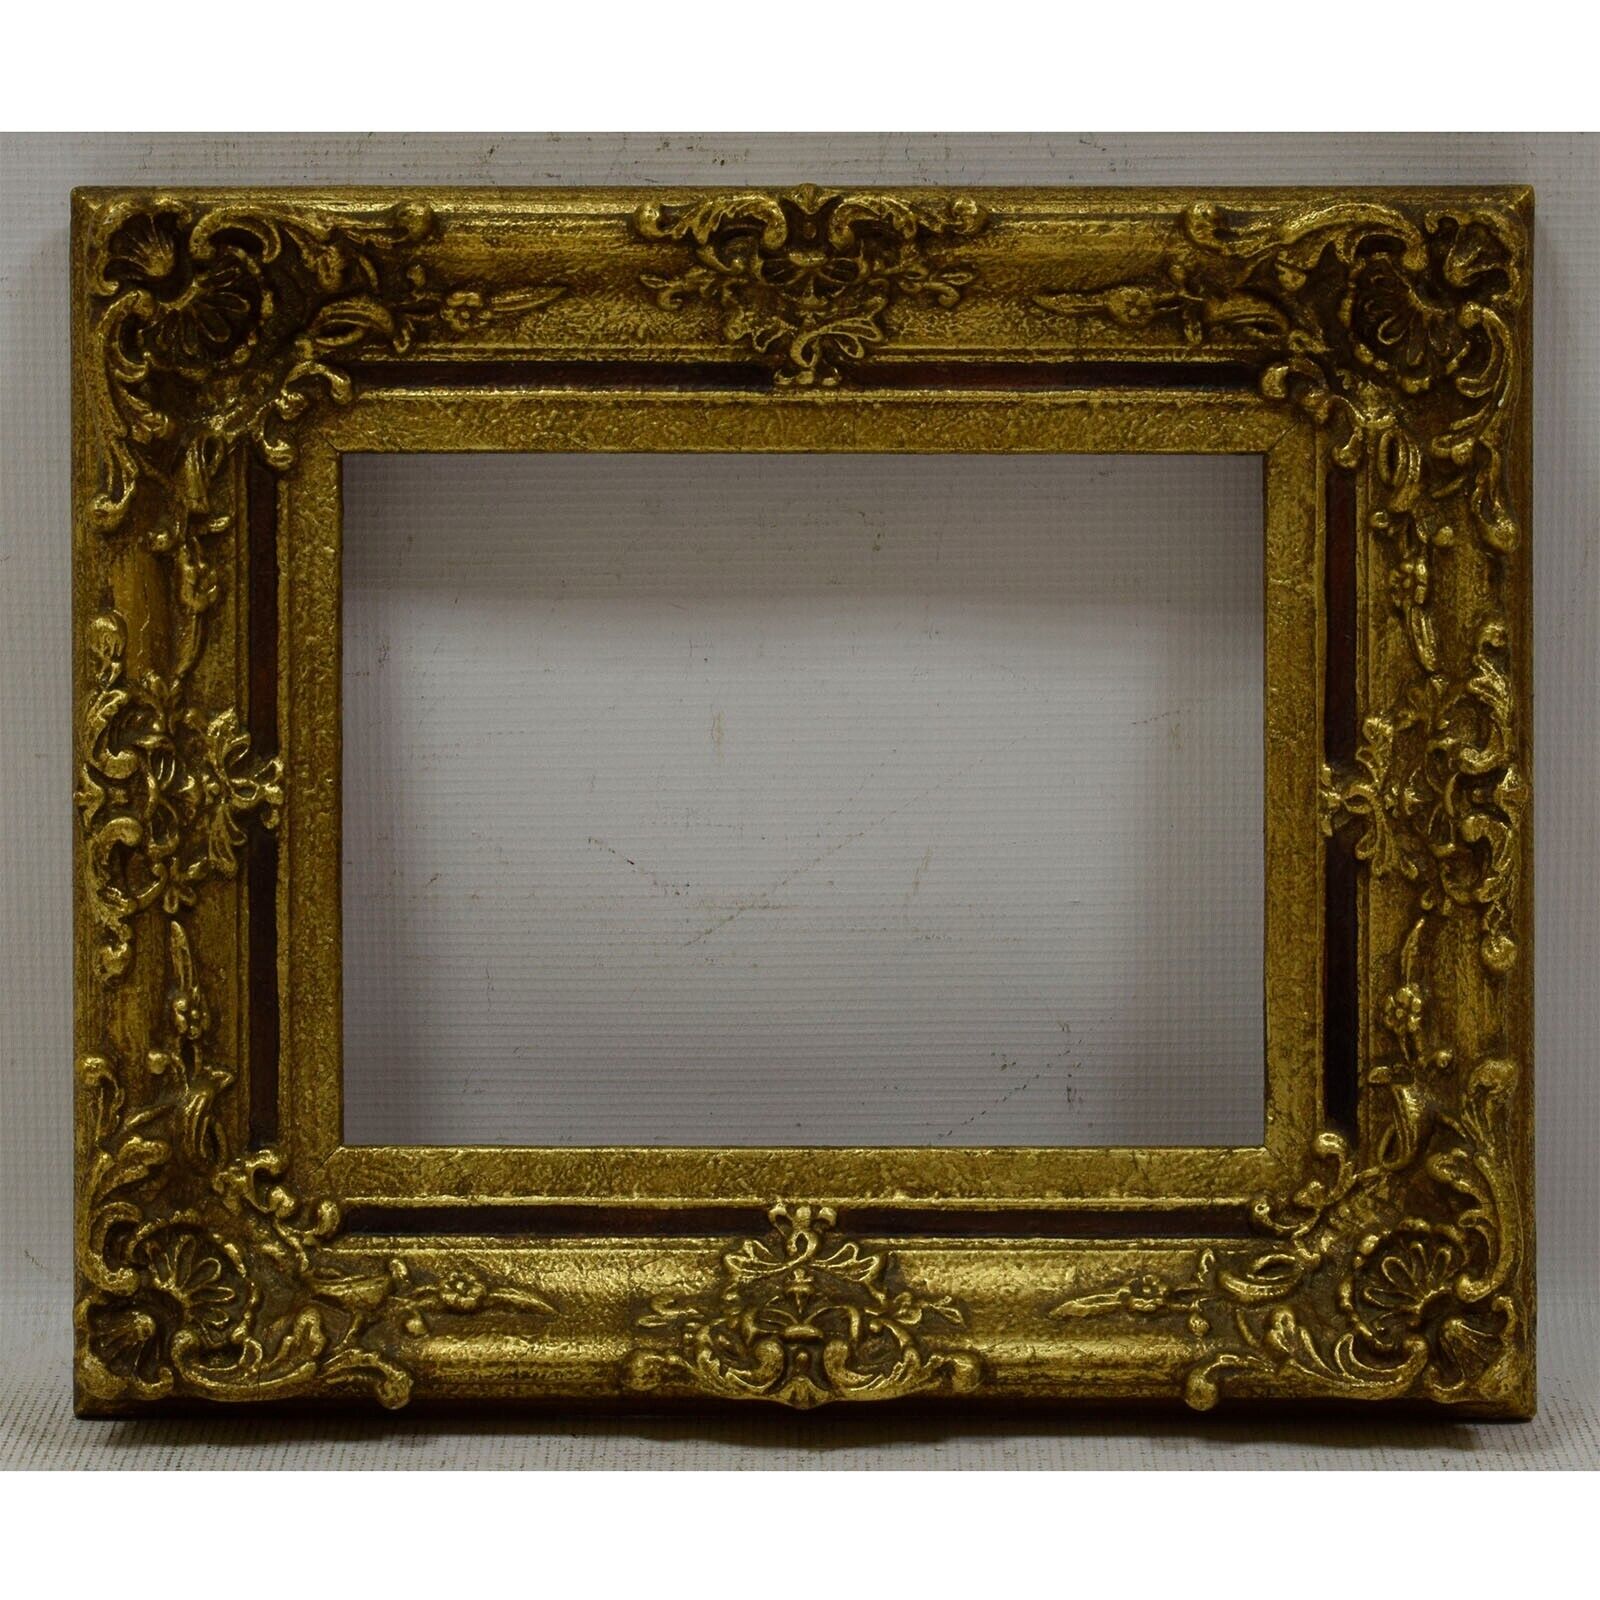 Ca 1920-1950 Old frame original condition with gold paint Internal: 9.8 x 7.7 in